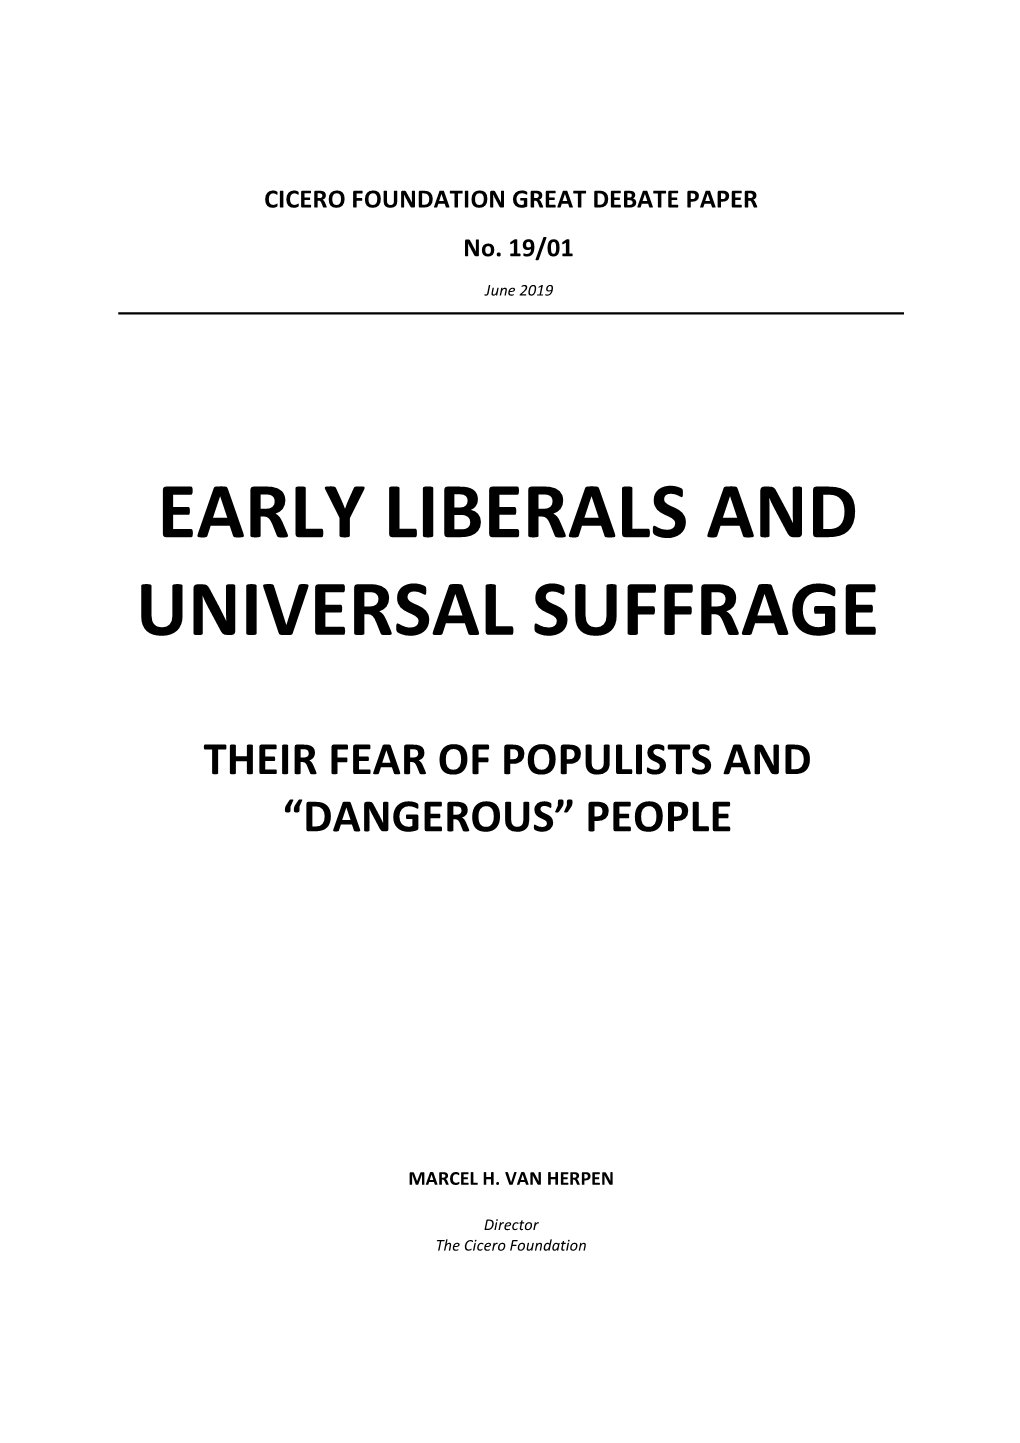 Early Liberals and Universal Suffrage